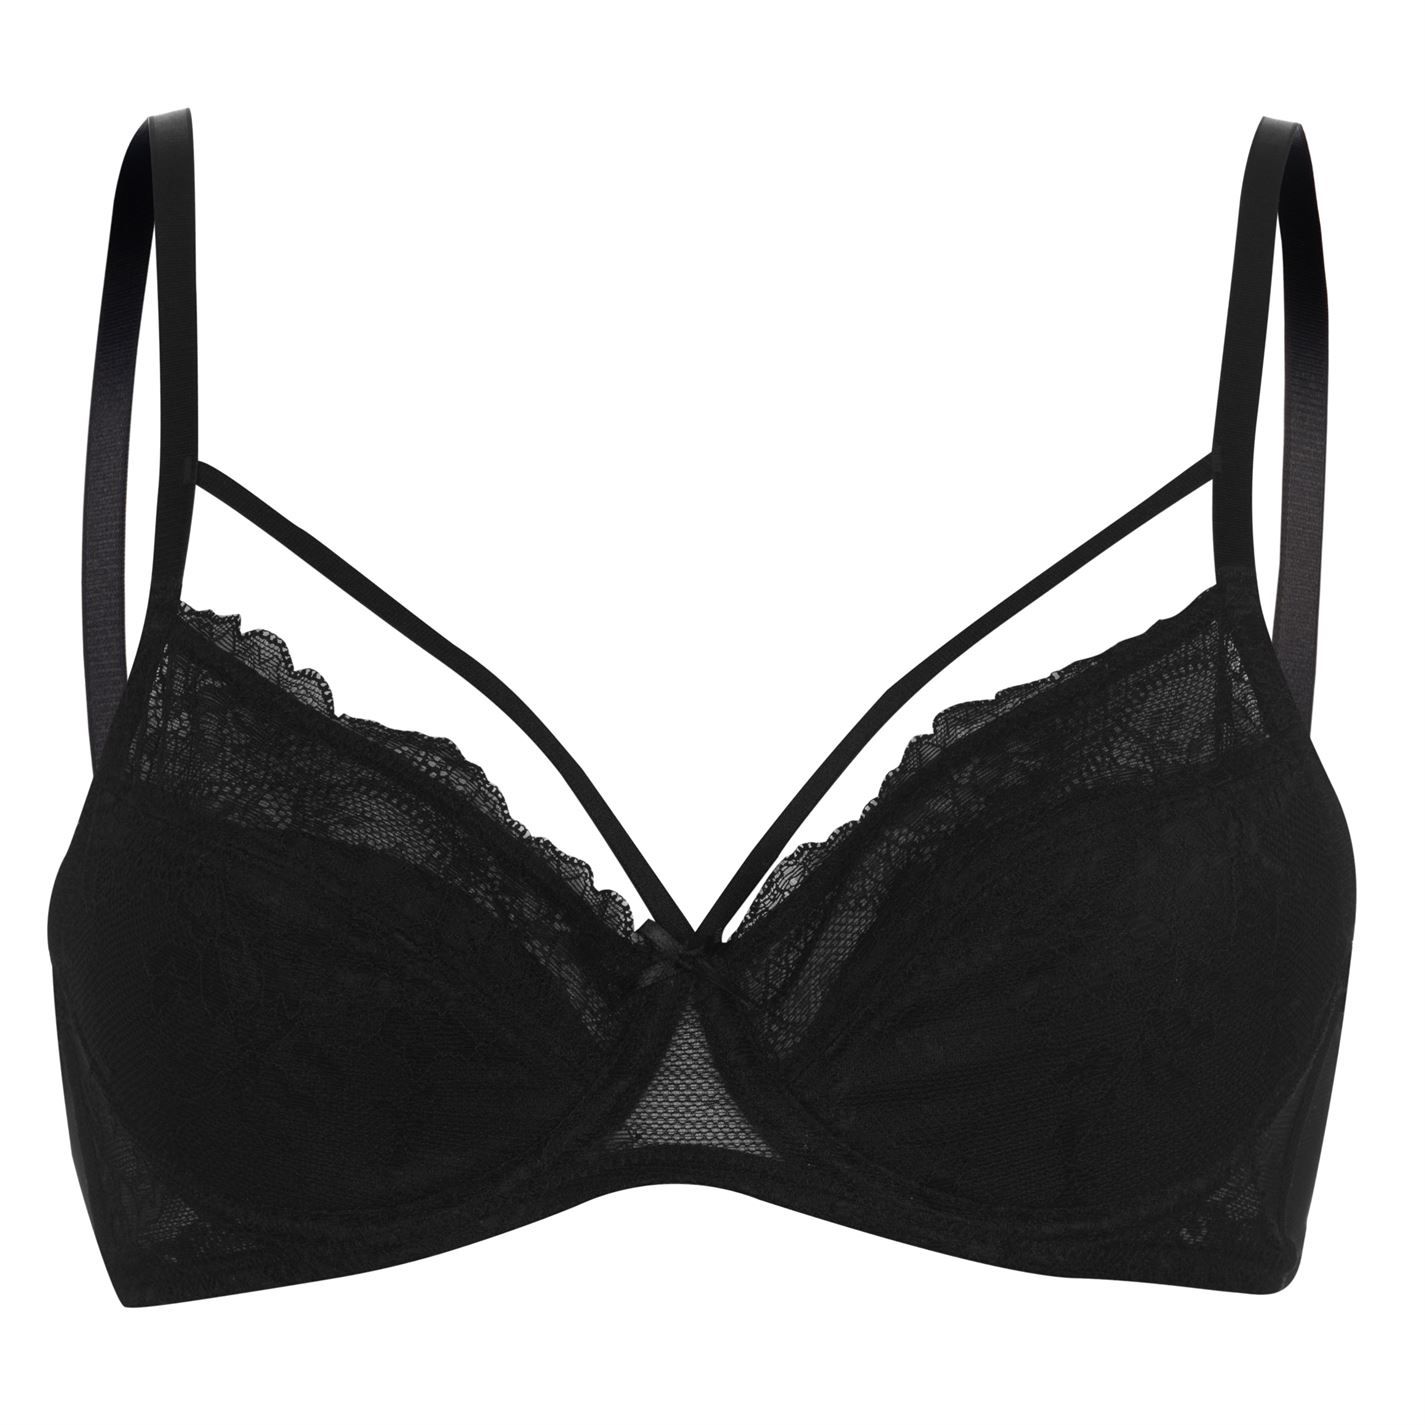 <strong> Firetrap Strap Bra Ladies </strong><br><br> This Firetrap Strap Bra is crafted with thin spaghetti straps and clip fastening to the back. It features lace detailing and is a lightweight construction. This bra is a block colour design and is complete with Firetrap branding. <br>> Bra<br>> Thin spaghetti straps<br>> Clip fastening to back<br>> Lace detailing<br>> Lightweight<br>> Block colour<br>> Firetrap branding<br>> 54% polyamide, 24% cotton, 16% polyester, 6% elastane<br>> Machine washable<br>> Keep away from fire